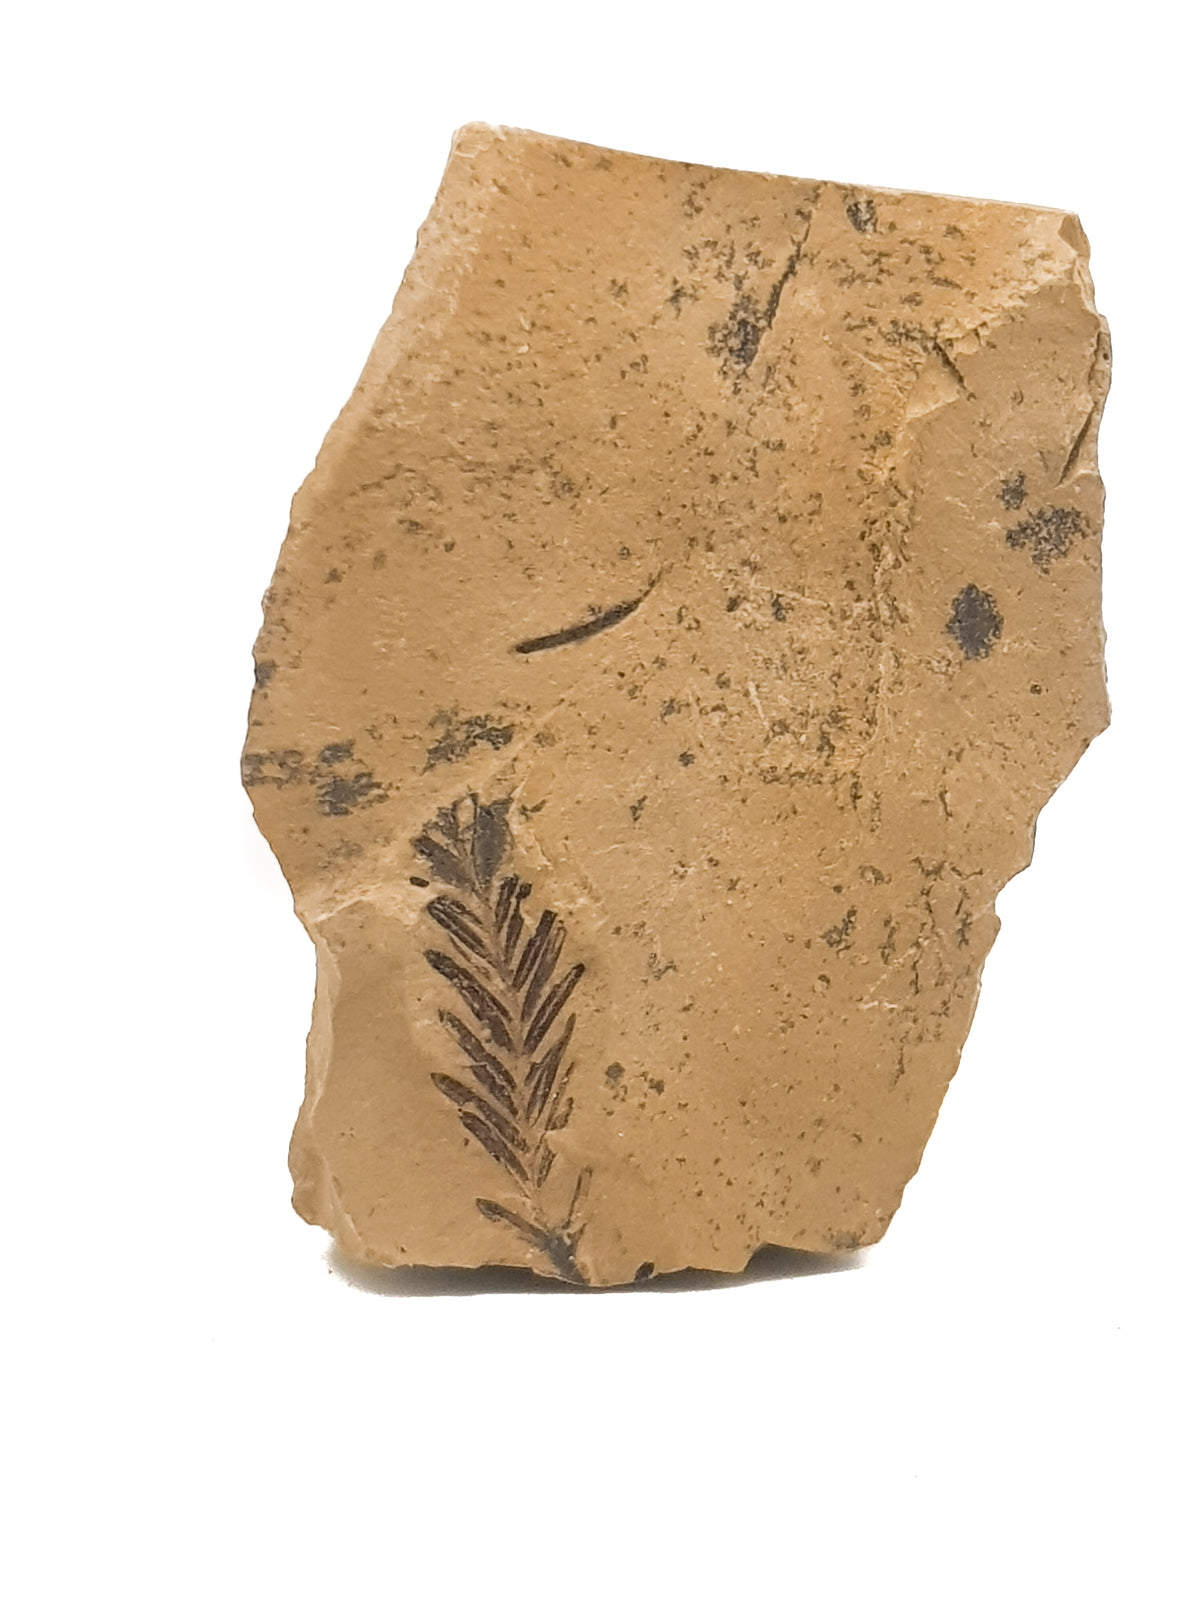 metasequoia leaf with associated plant material and psilomane dendtric growth on a beige limestone.